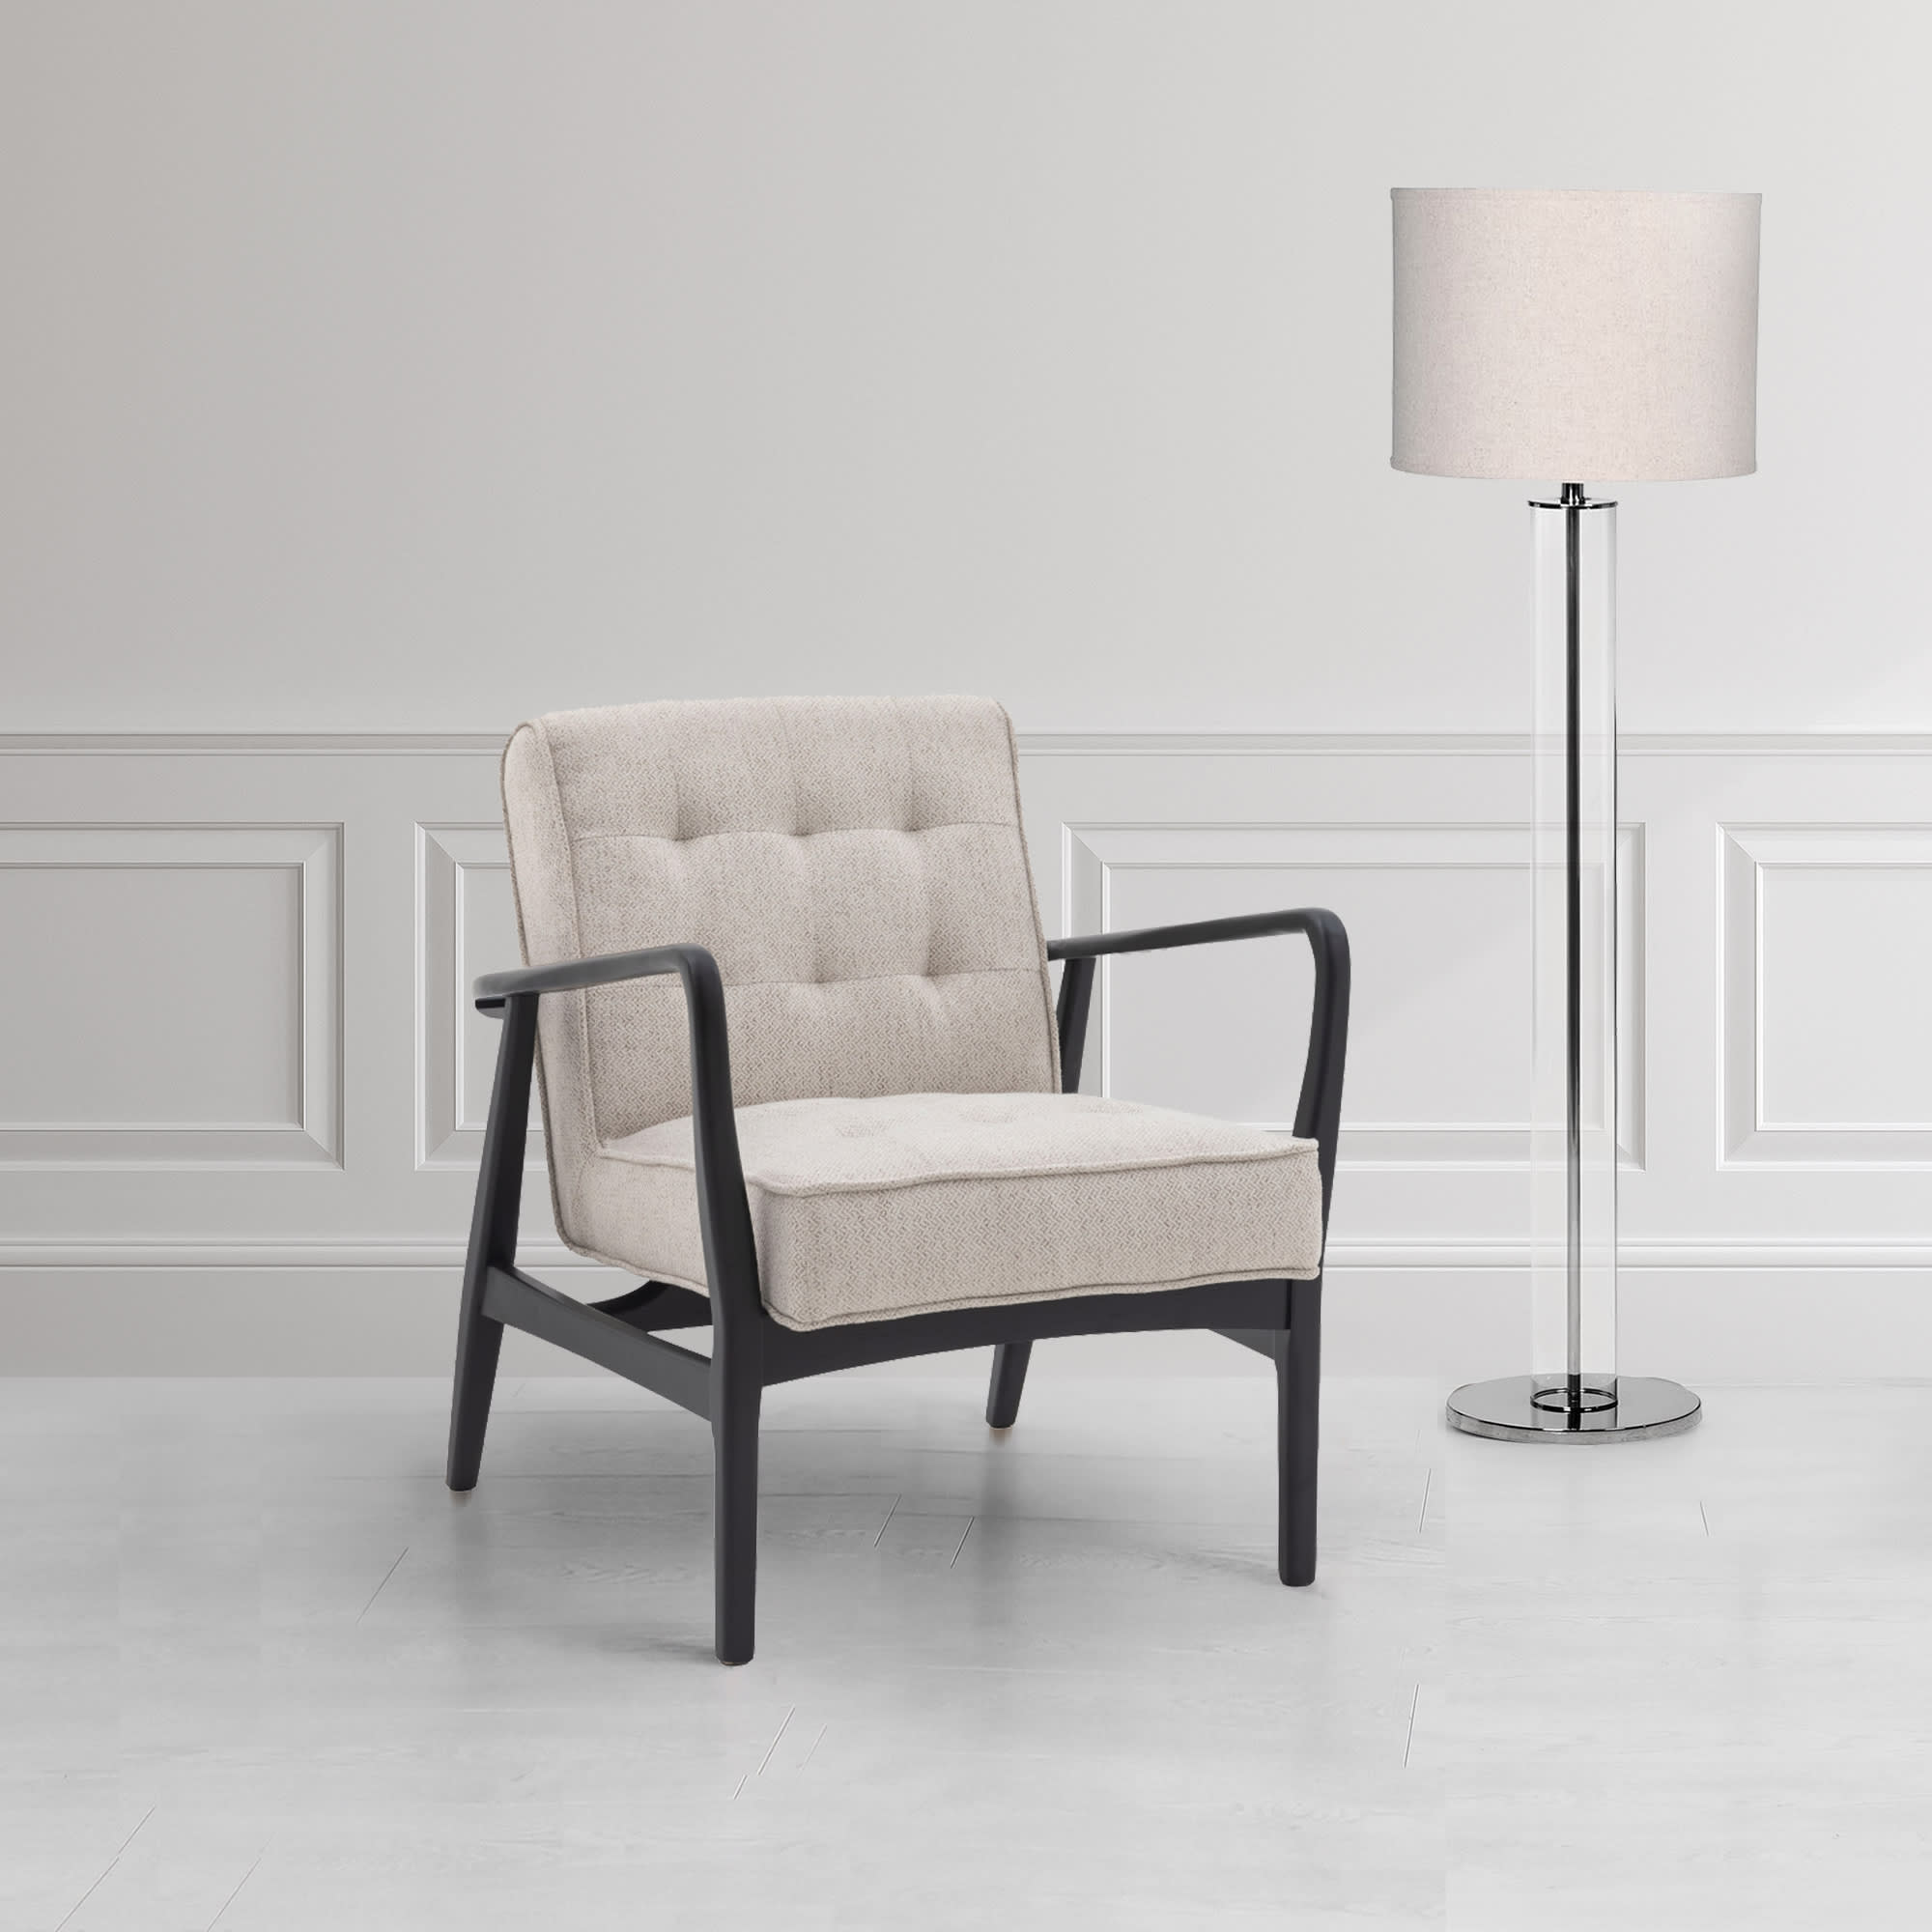 Oatmeal Pleated Armchair with Contrast Frame